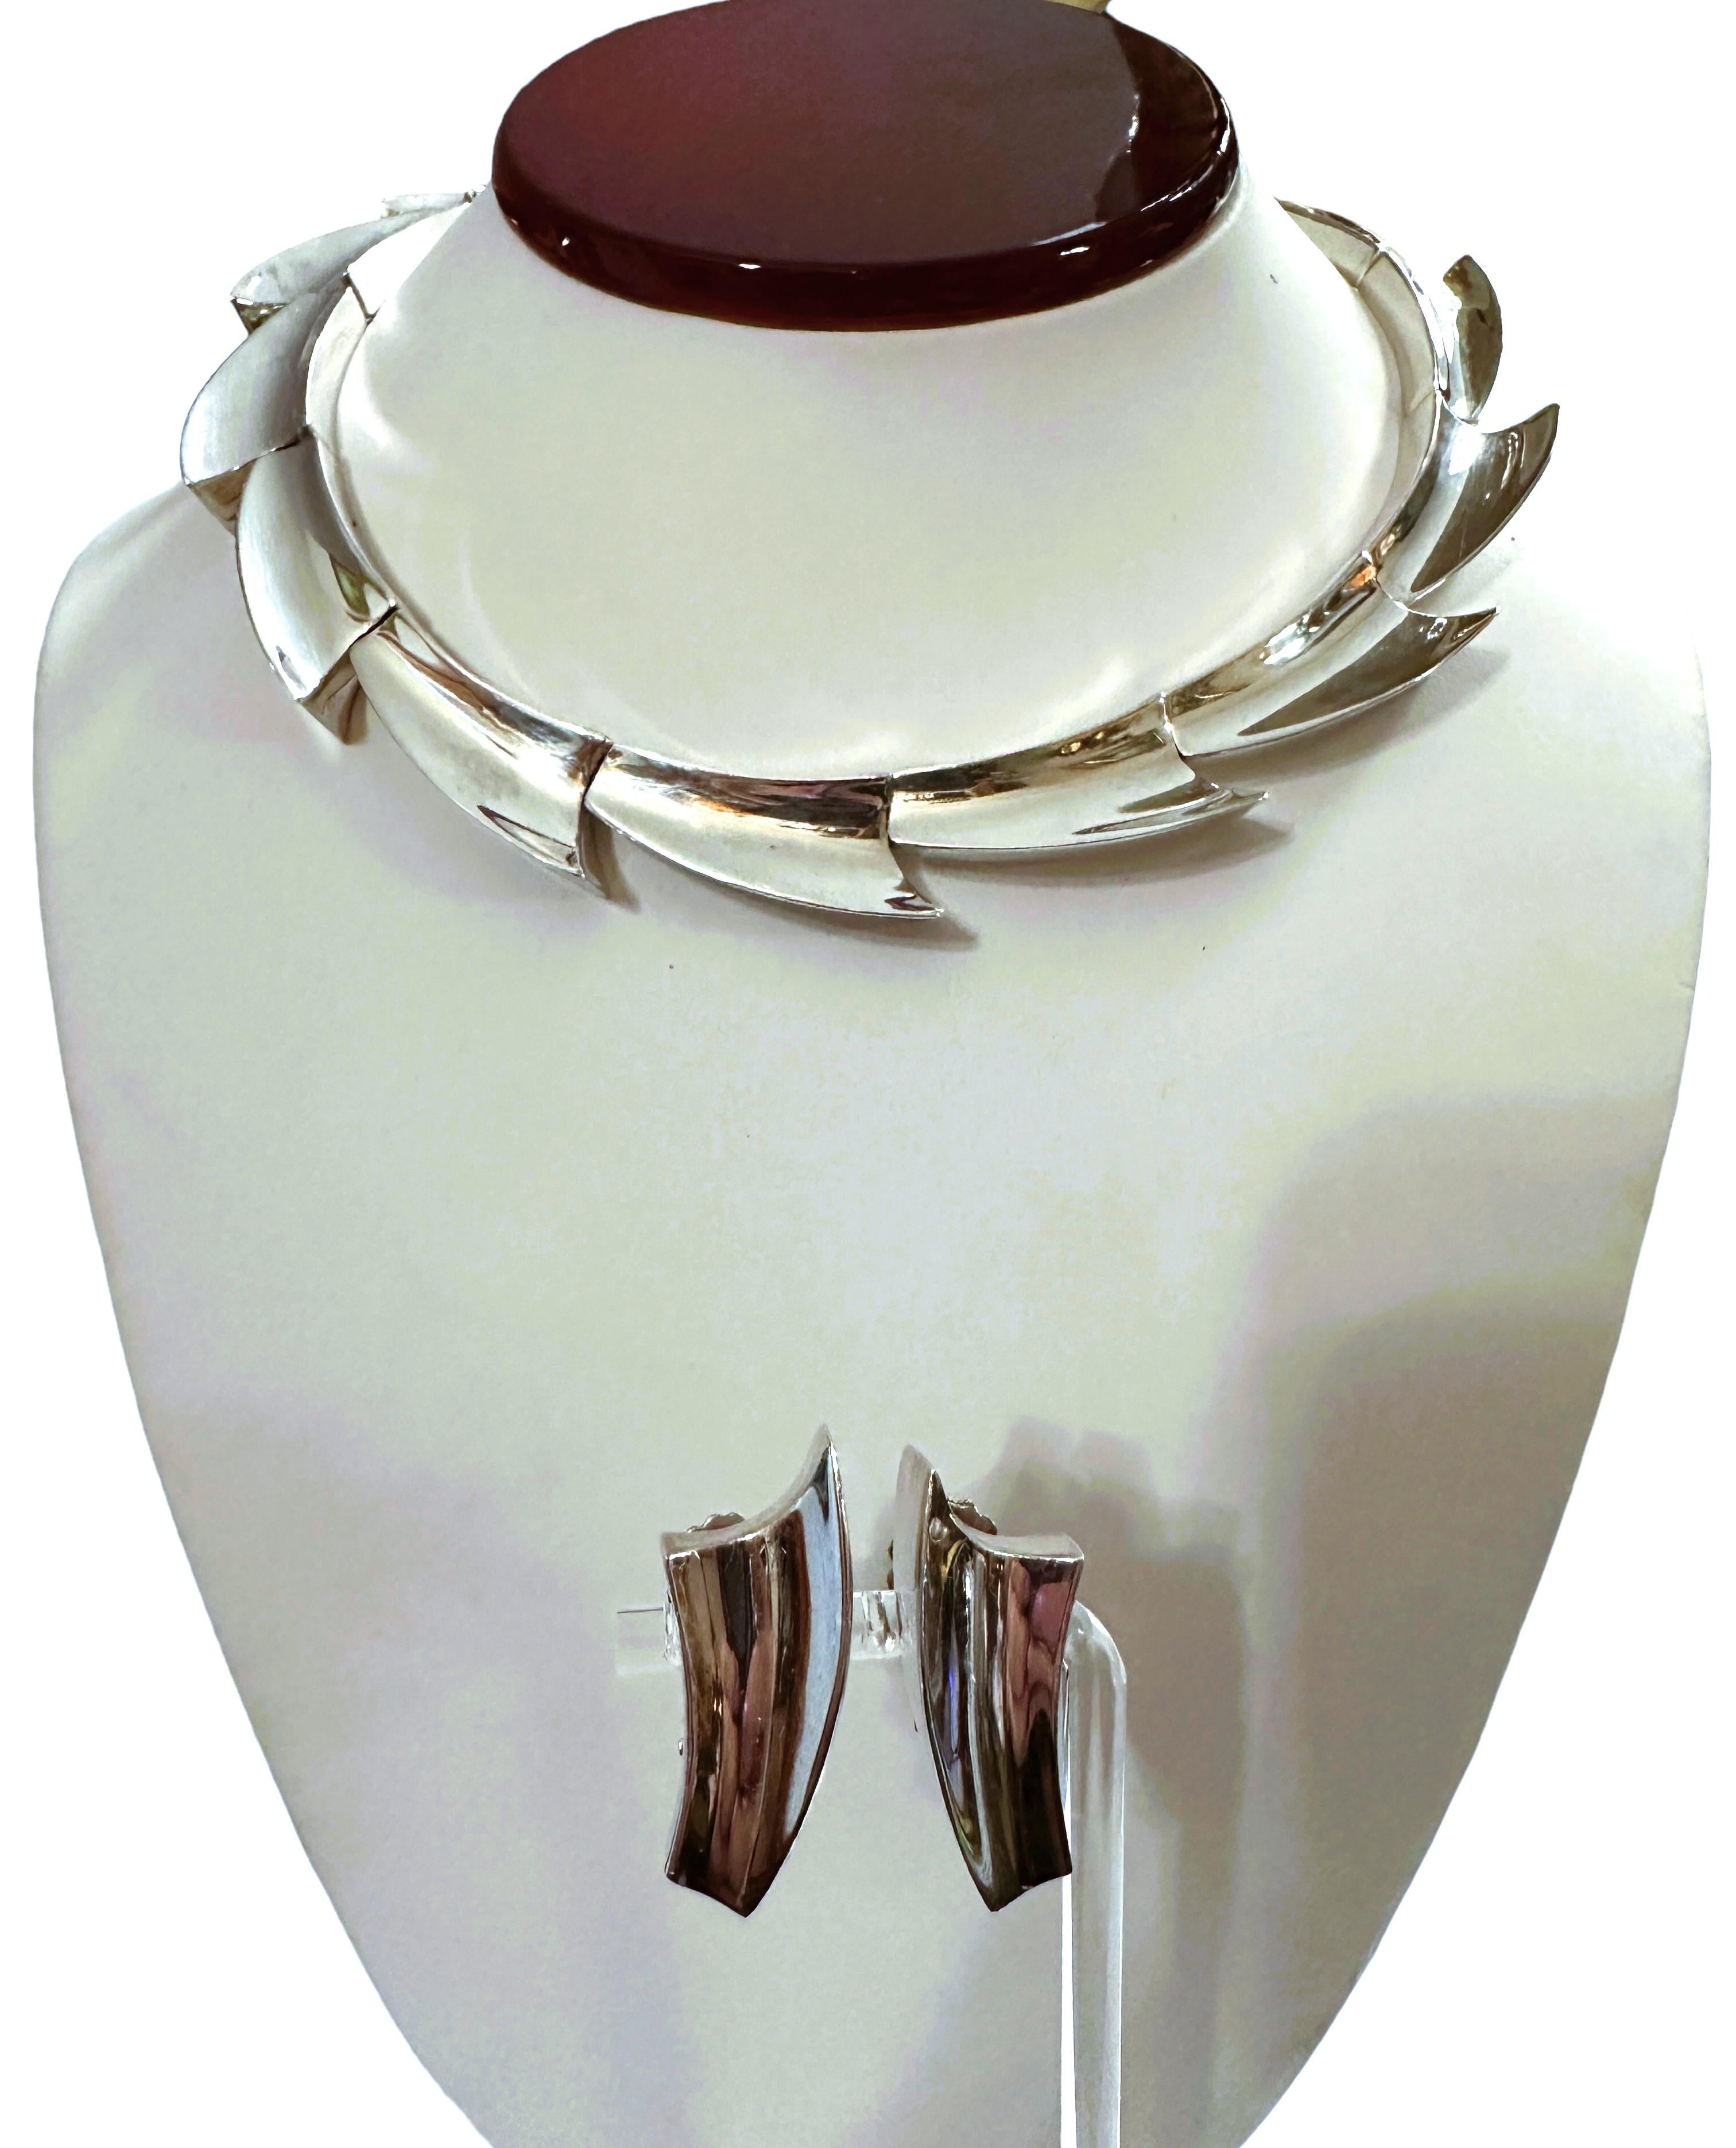 Signed Fidencio Serrano Southwestern Sterling Silver Necklace & Earrings In Excellent Condition For Sale In Eagan, MN